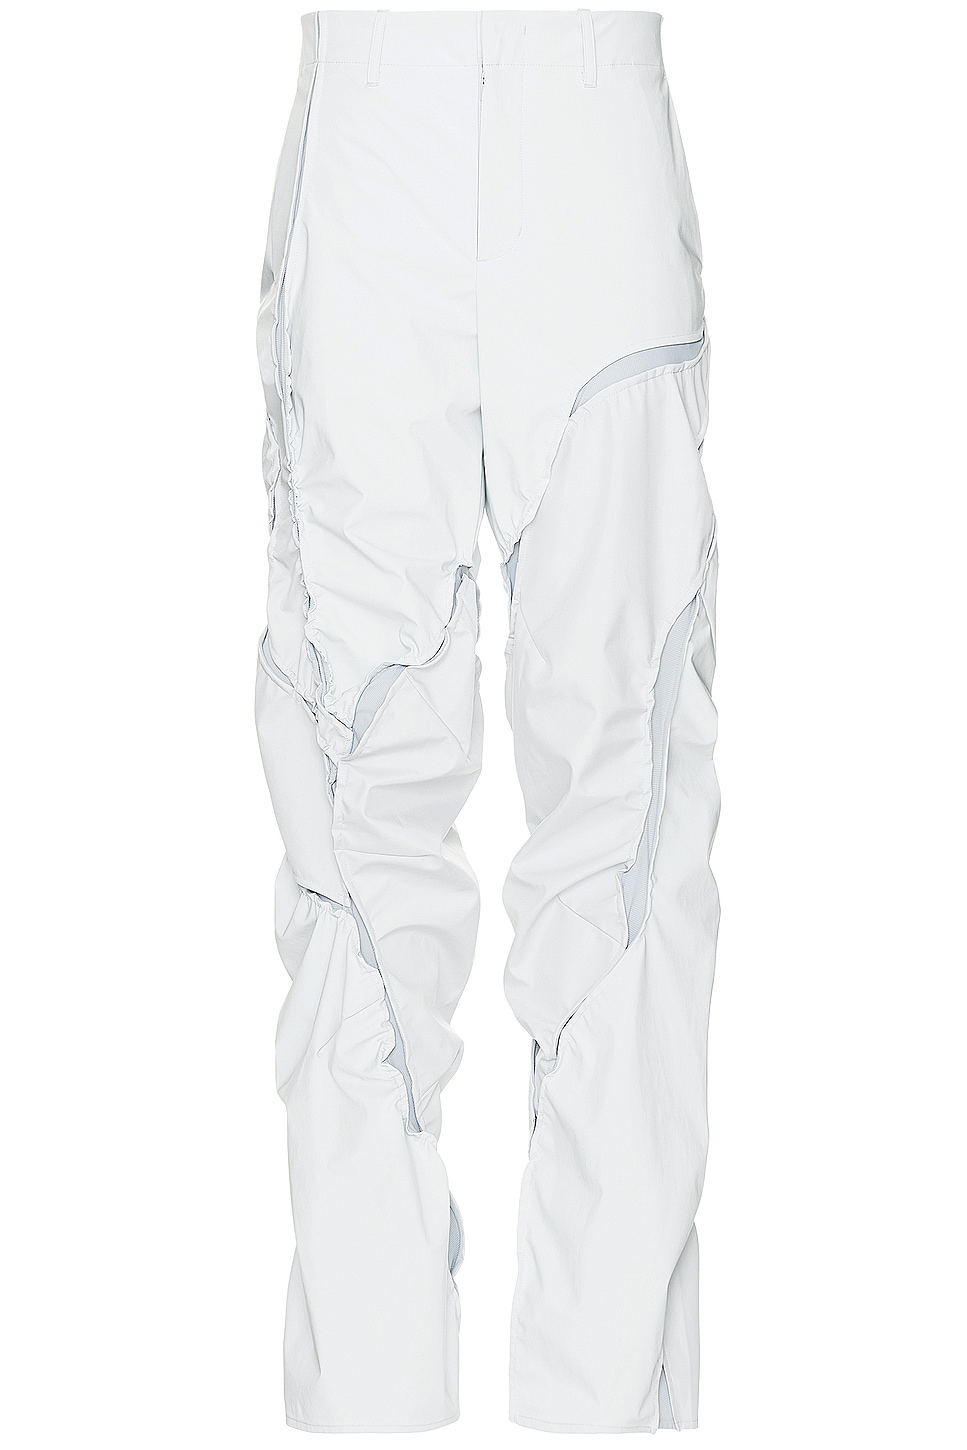 Image 1 of POST ARCHIVE FACTION (PAF) 6.0 Technical Pants in Ice